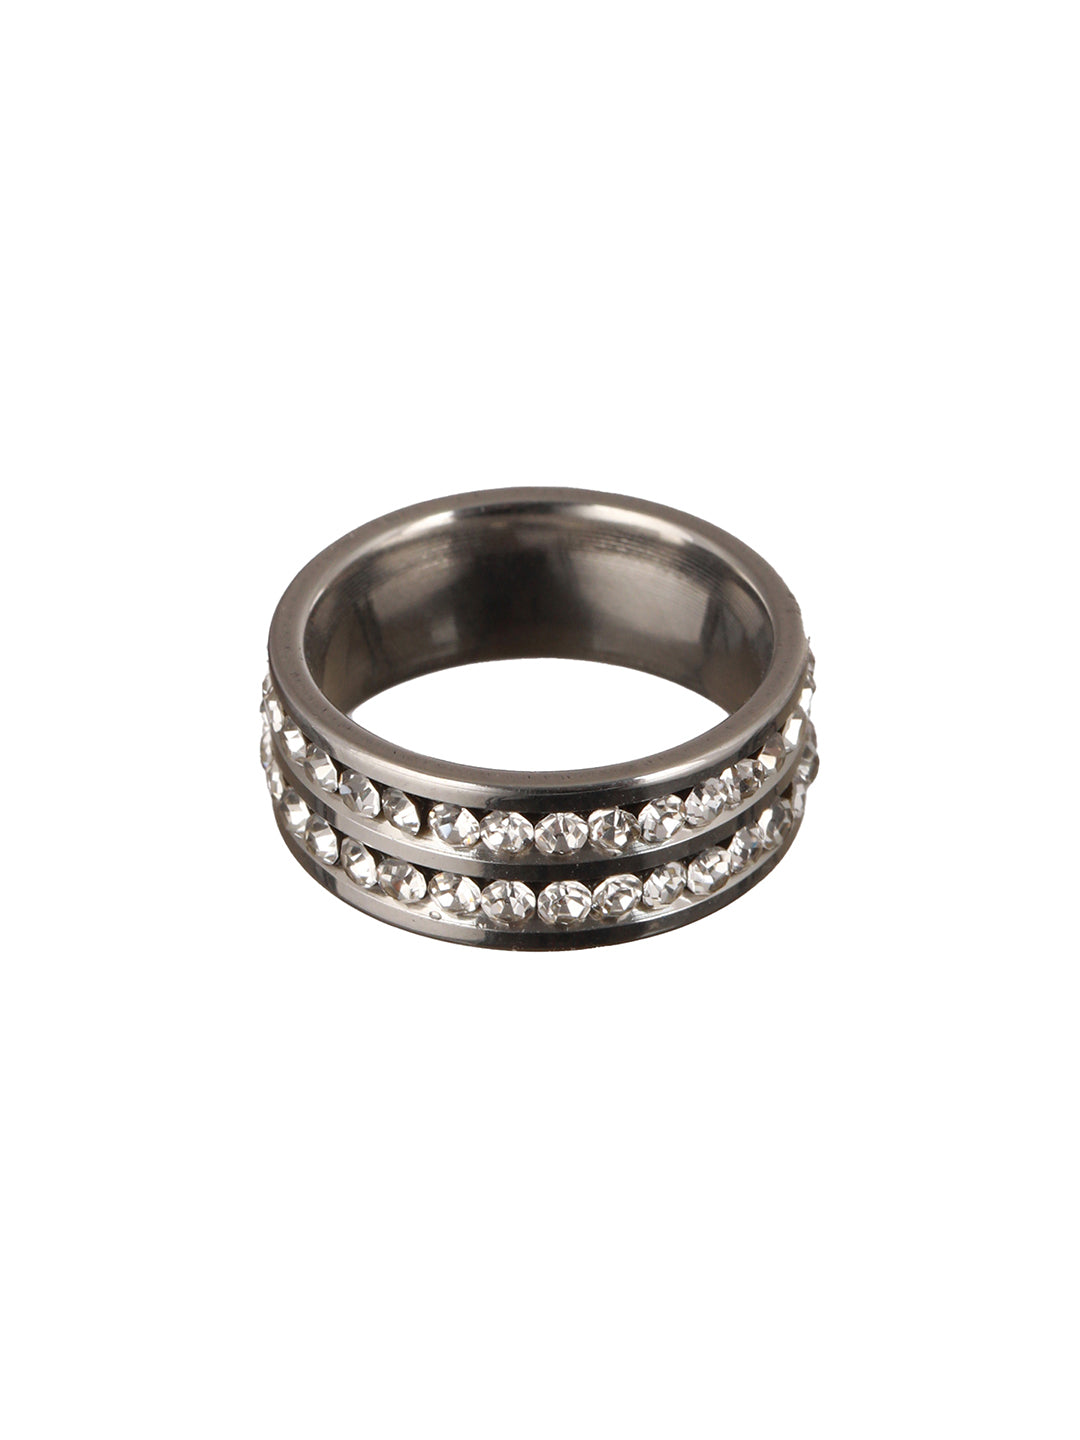 Bold by Priyaasi Stylish AD Studded Silver-Plated Finger Band Ring for Men